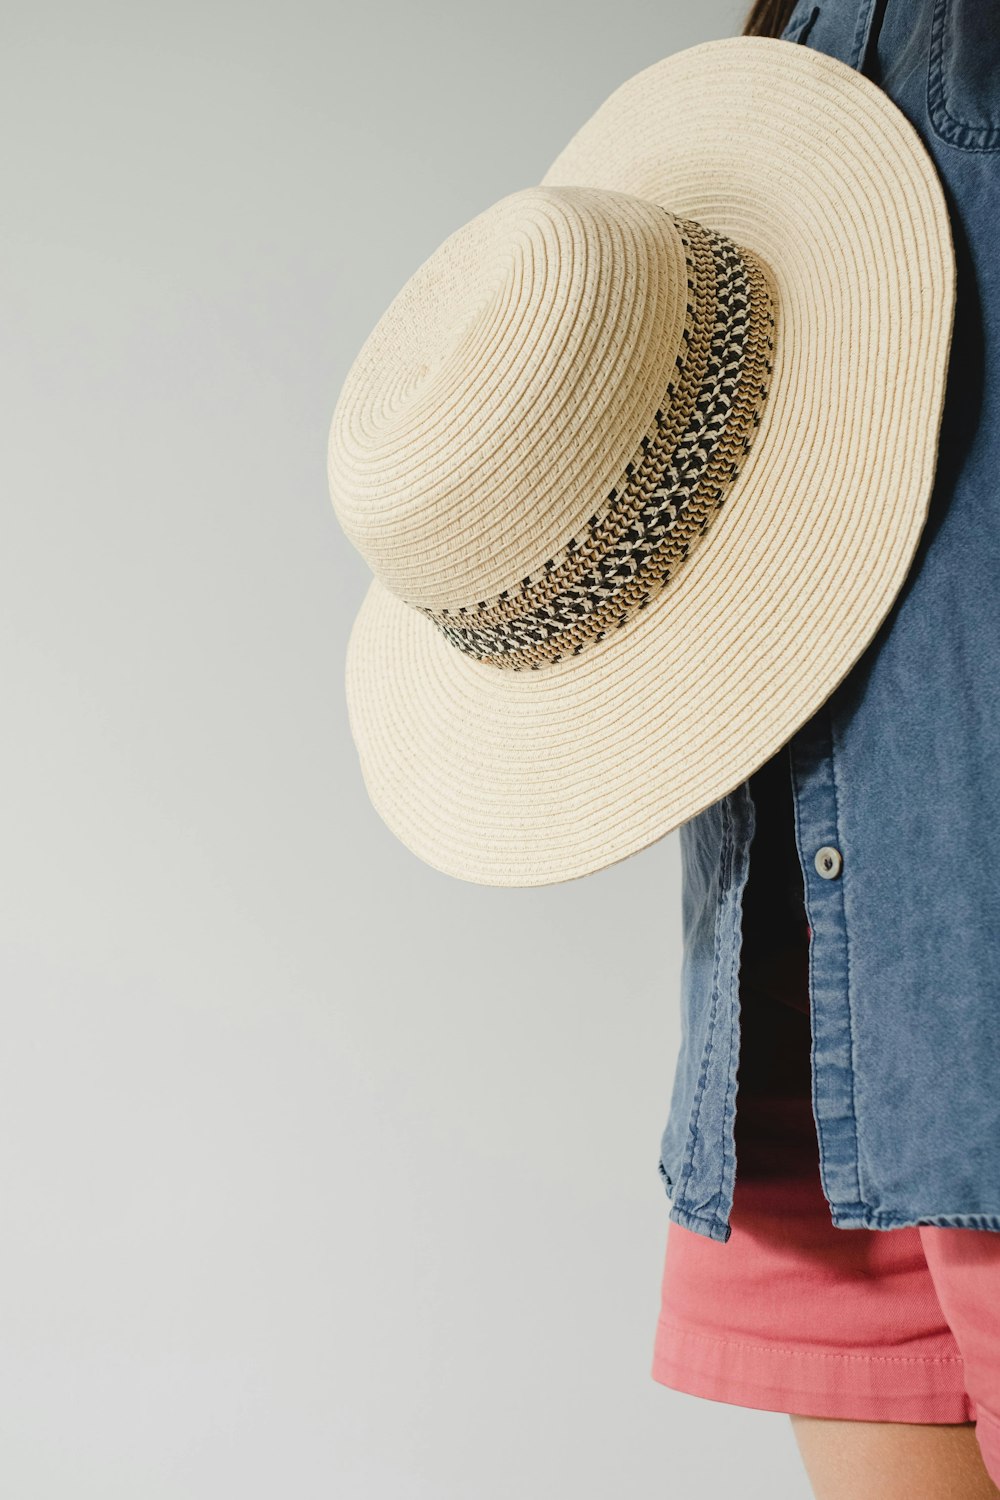 person wearing brown straw hat and blue denim jacket